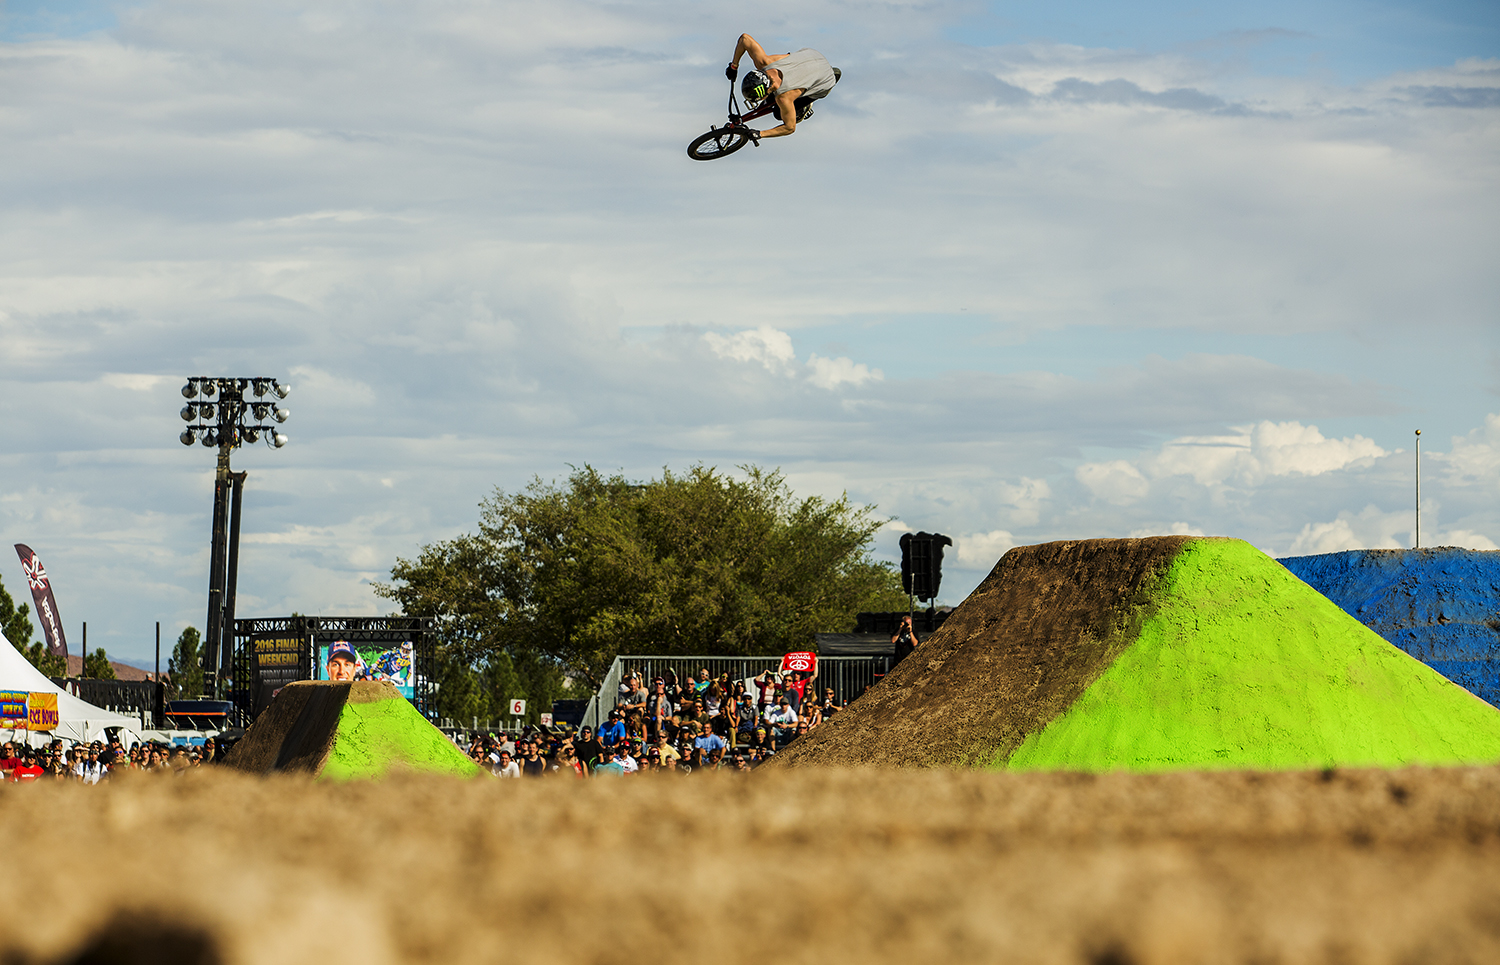 Monster Energy Pat Casey Wins the Toyota Best Trick at the Monster Cup BMX Dirt Jam